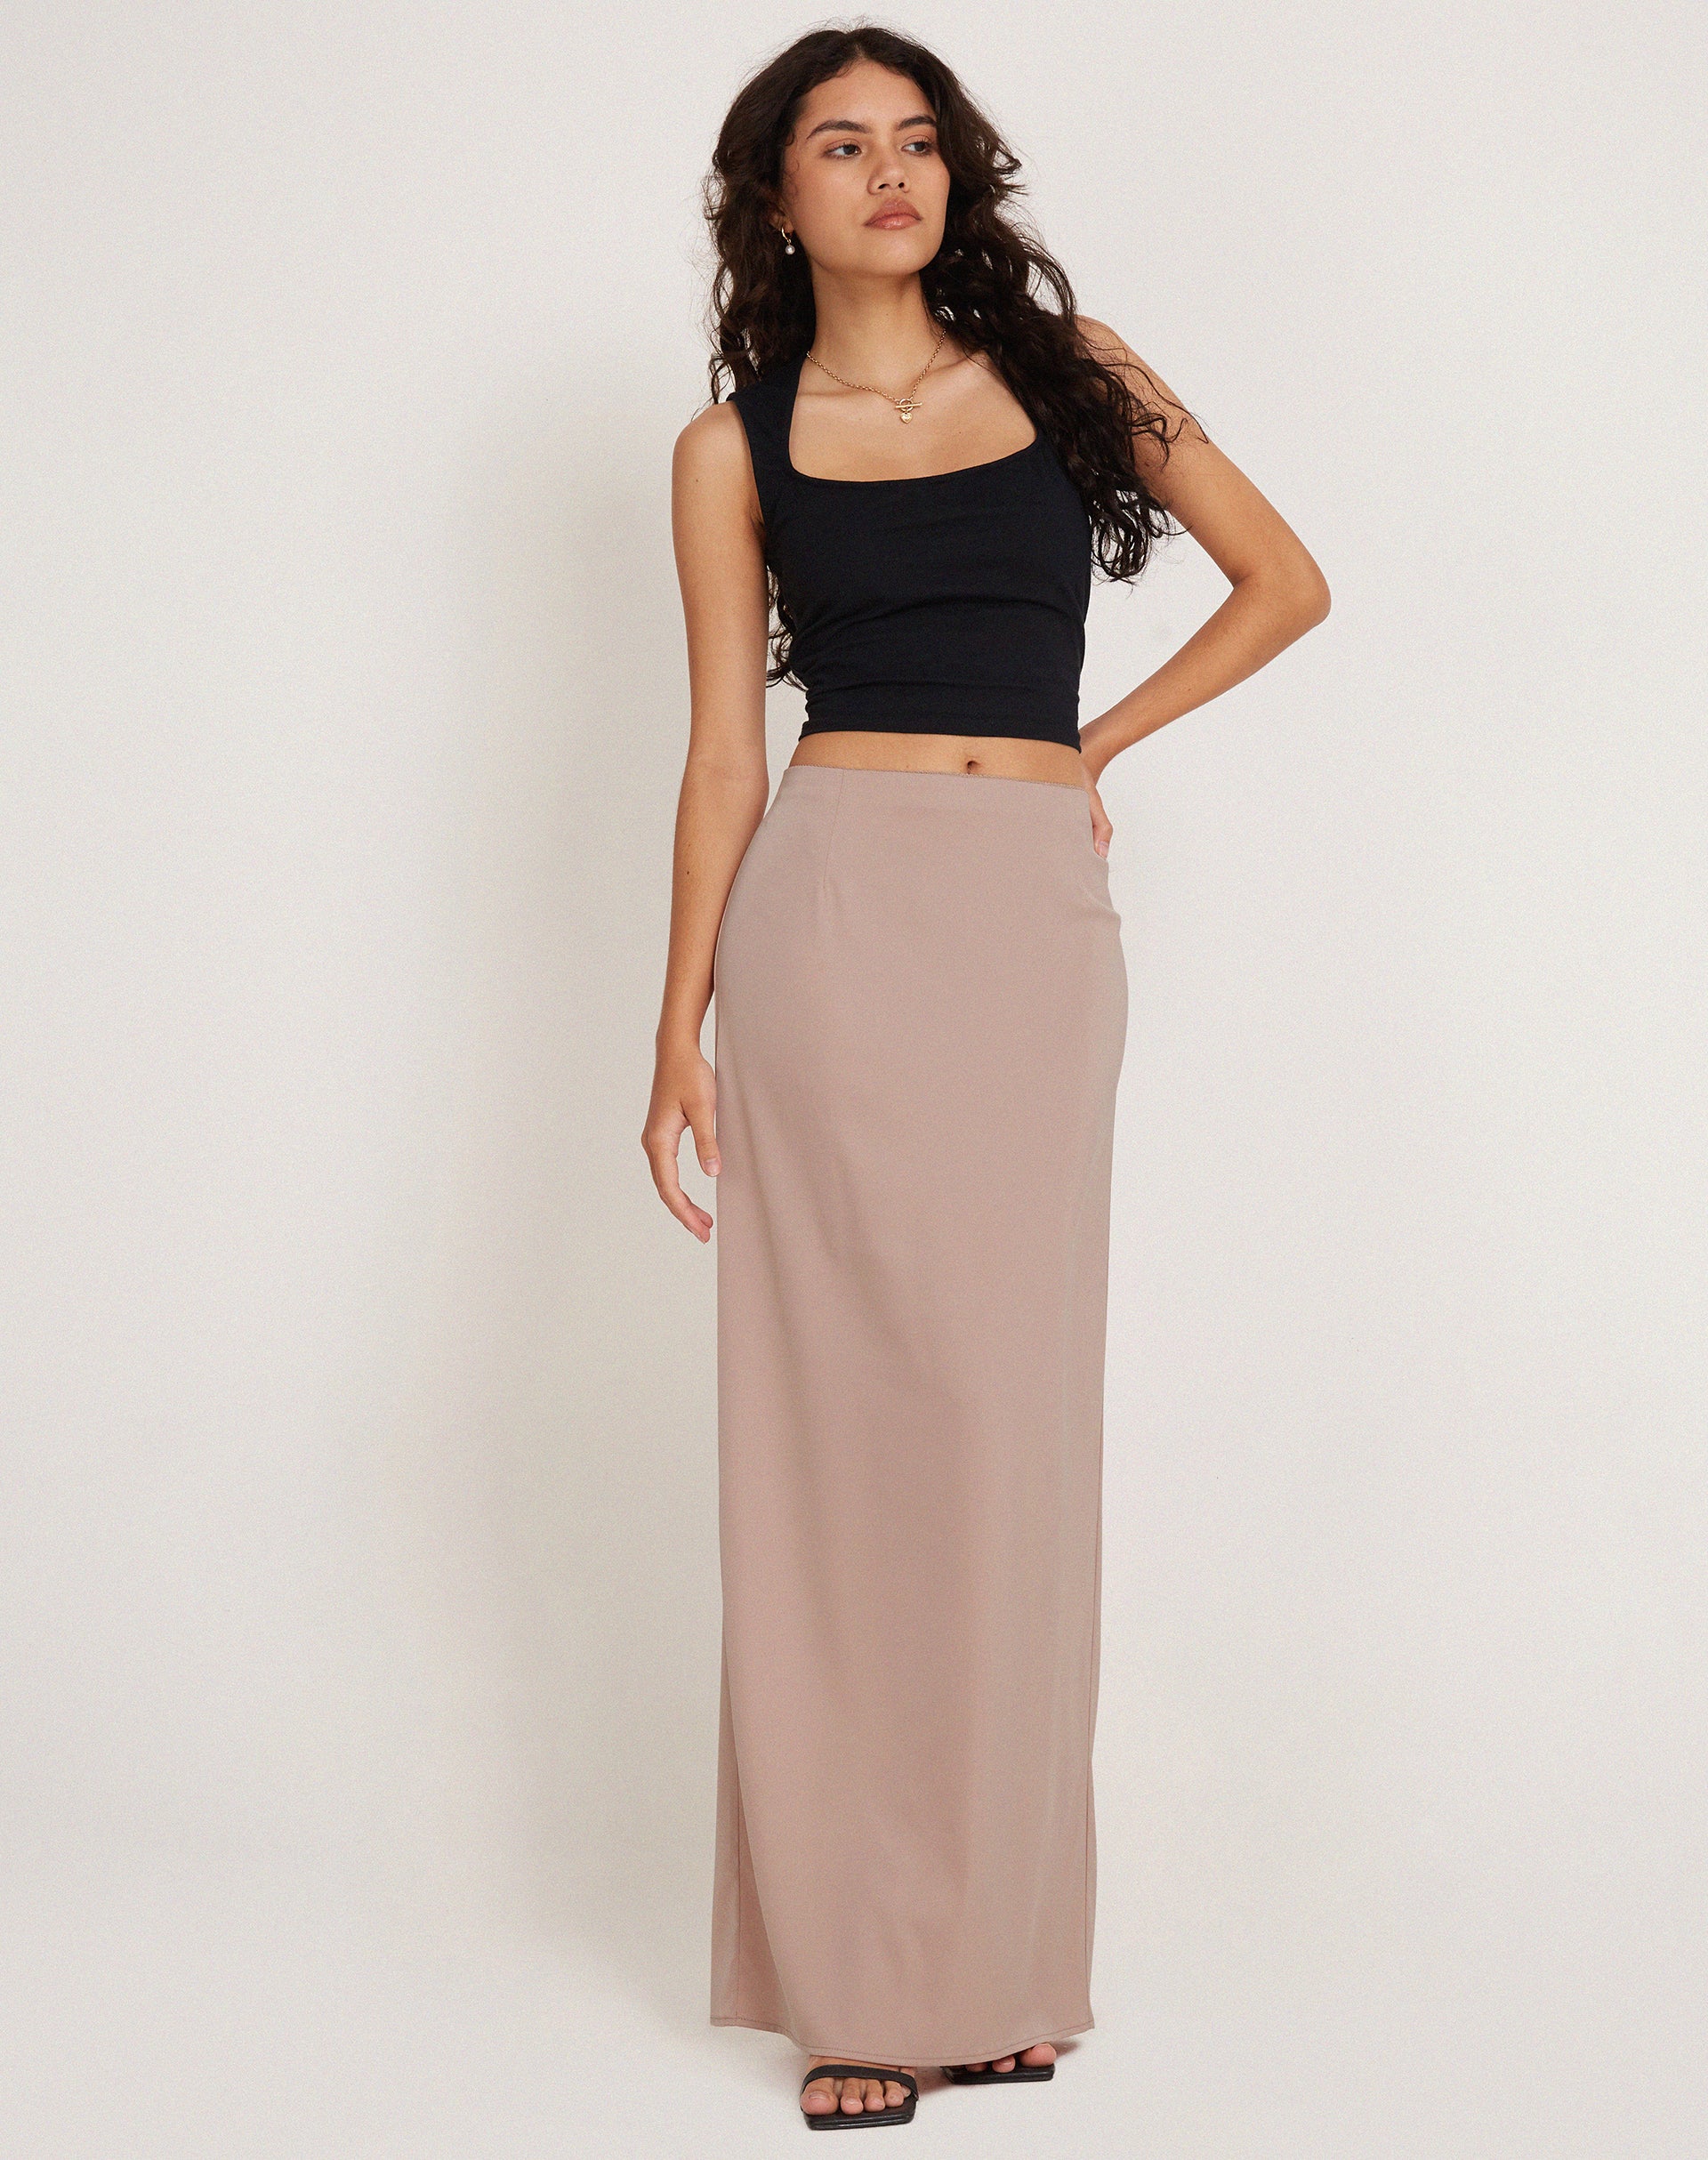 Image of Layla Maxi Skirt in Satin Dusky Pink